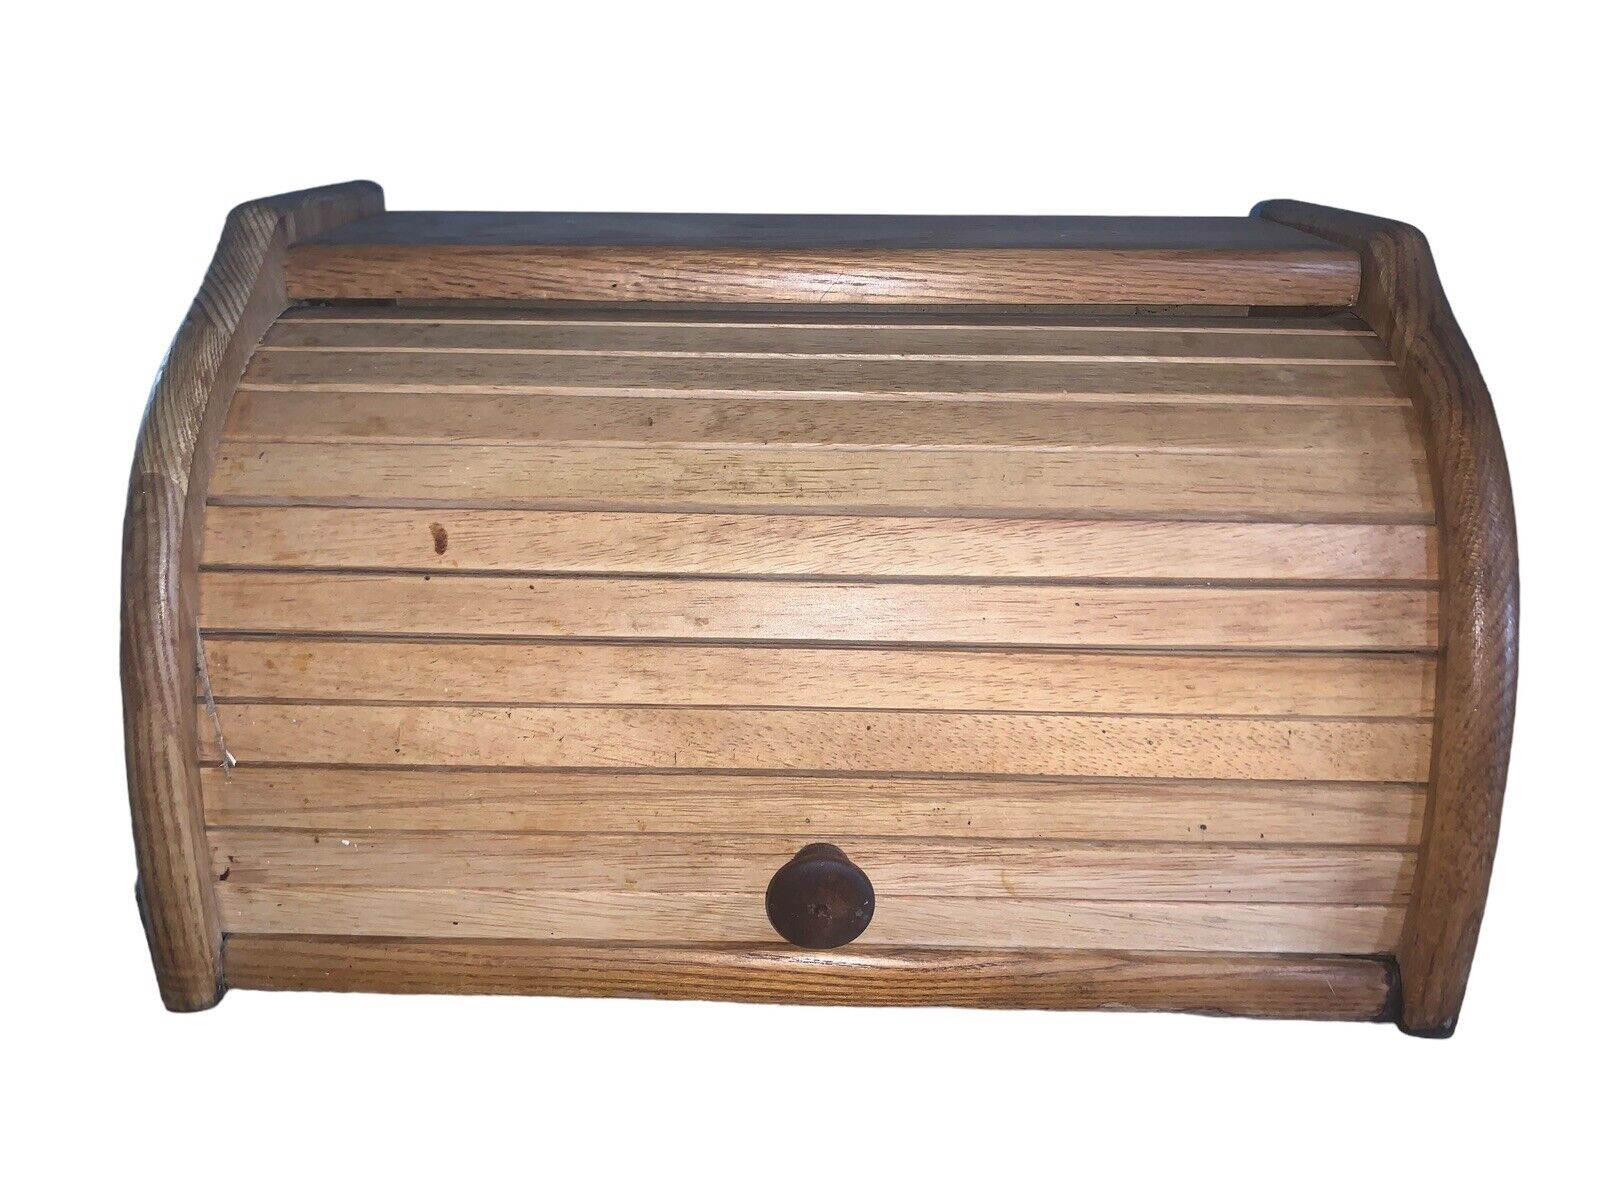 Bamboo Bread Box Wooden Storage Basket Holder Vintage Large Roll Top READ